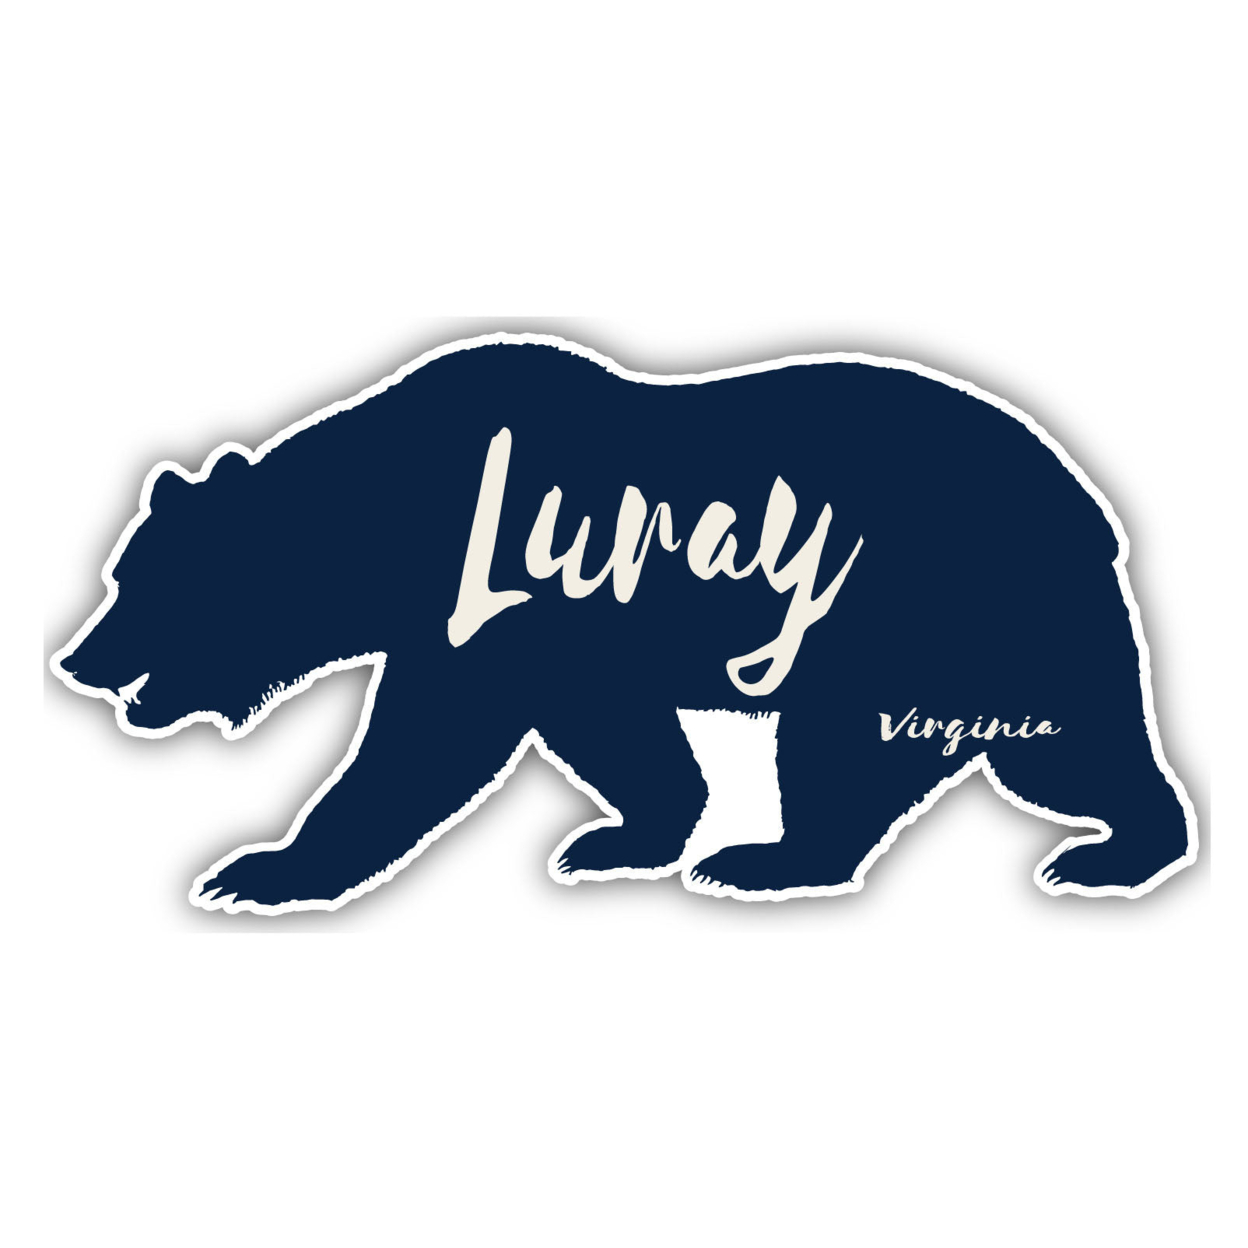 Luray Virginia Souvenir Decorative Stickers (Choose Theme And Size) - 4-Inch, Camp Life